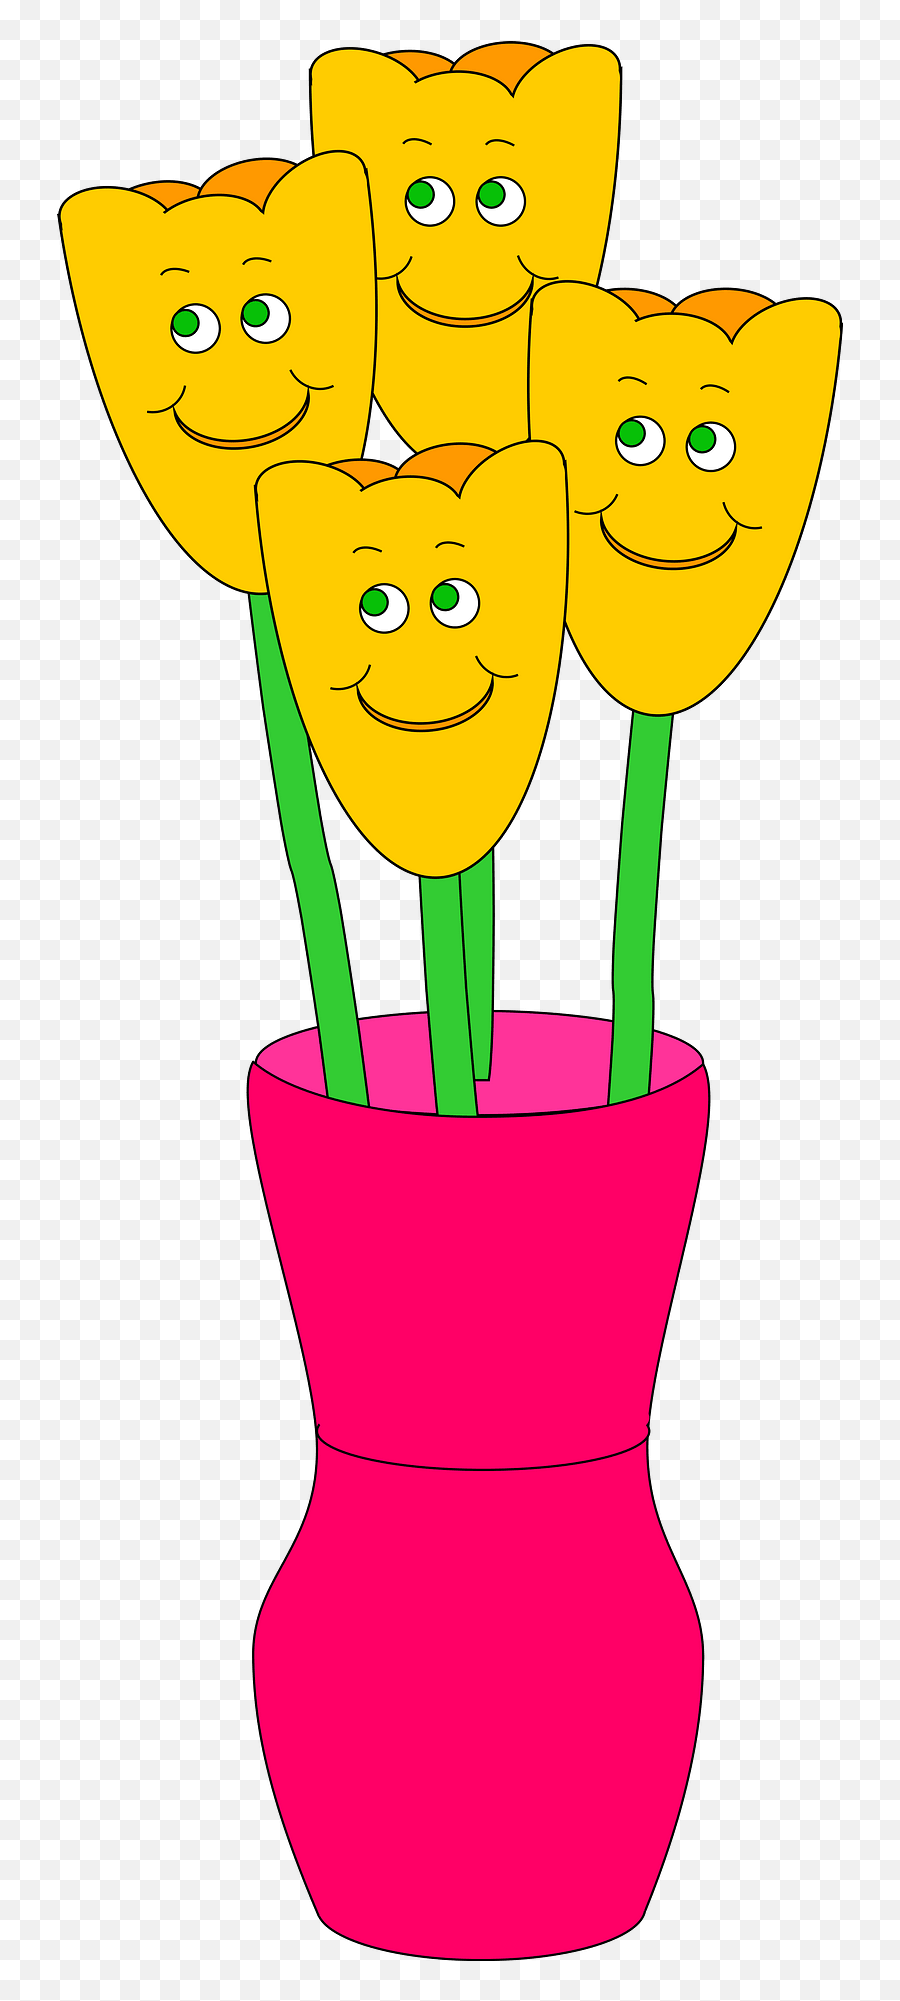 Pink Vase Of Yellow Tulips With Faces Clipart Free Download - Cartoon Vase With 4 Flowers Emoji,Flower Emoji Face